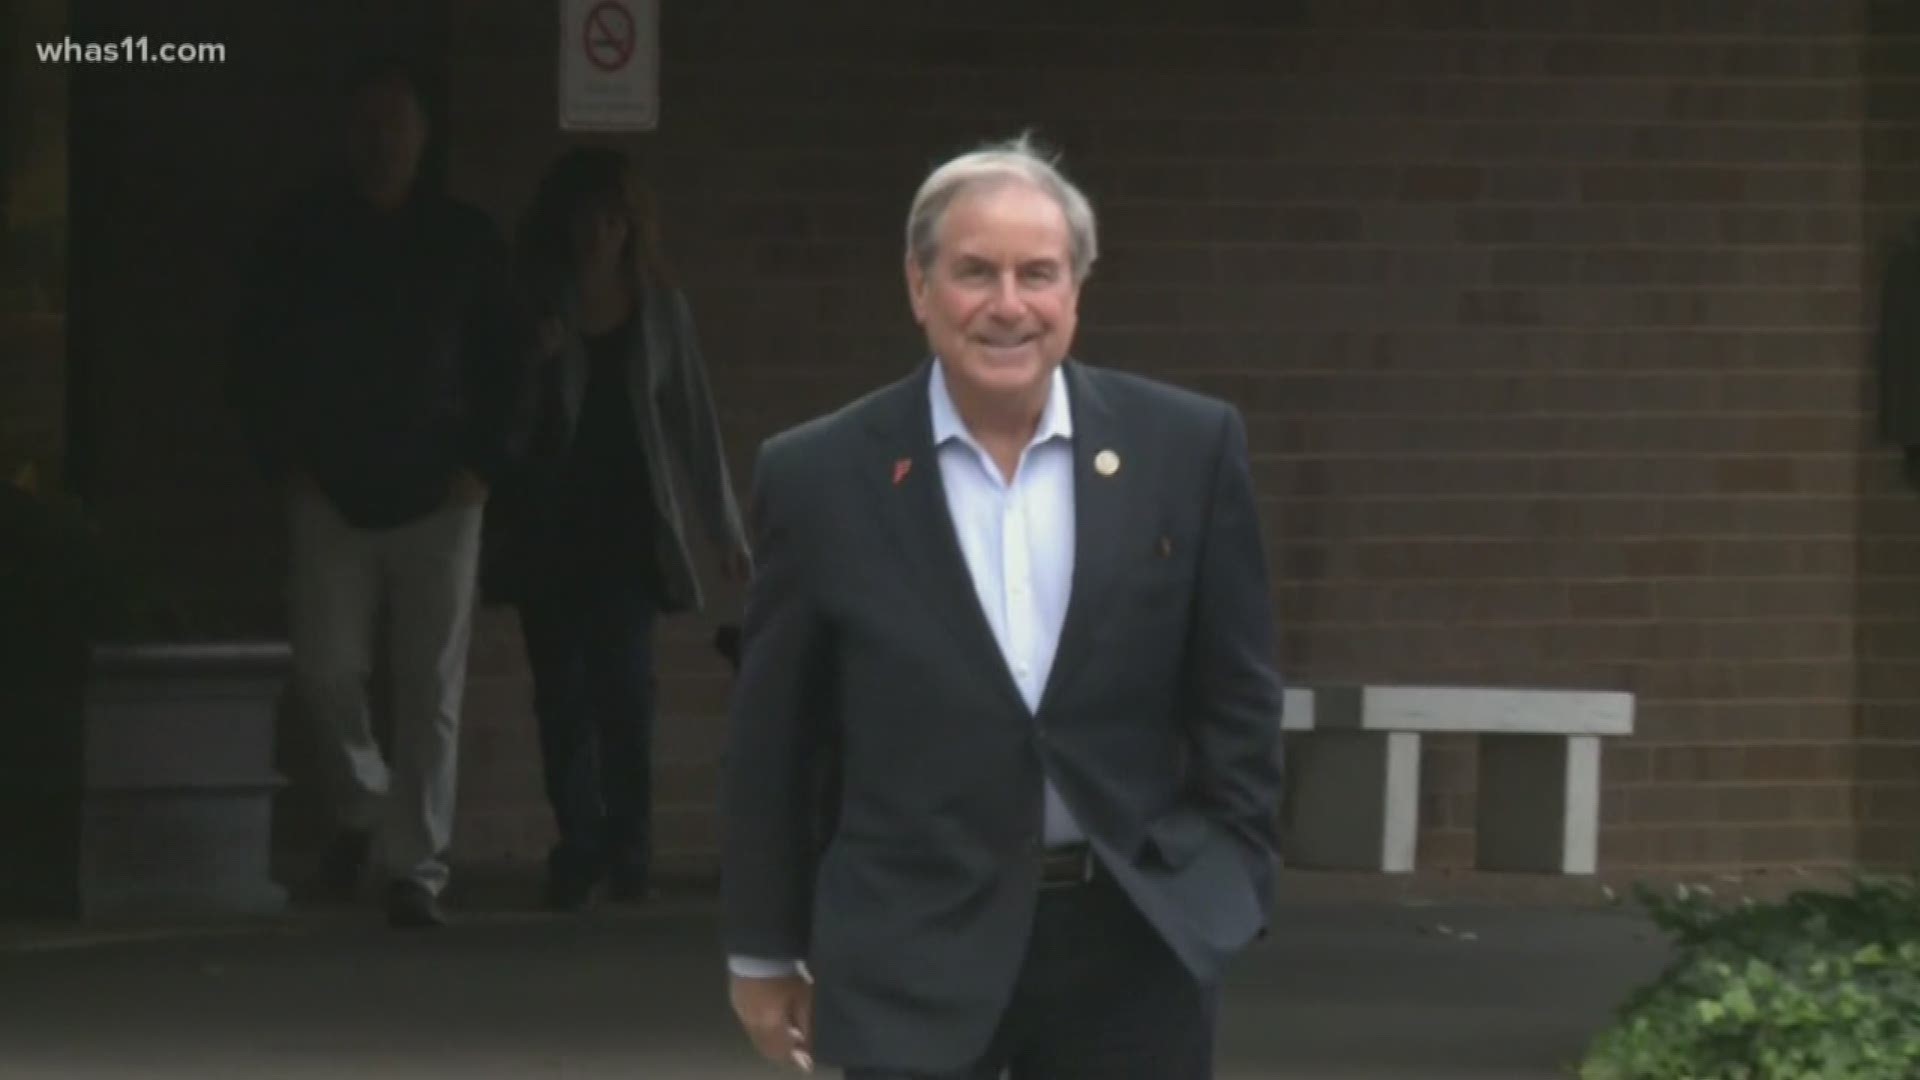 Louisville-native Congressman John Yarmuth  is running for an 8th term in the US House of Representatives for the 3rd district.